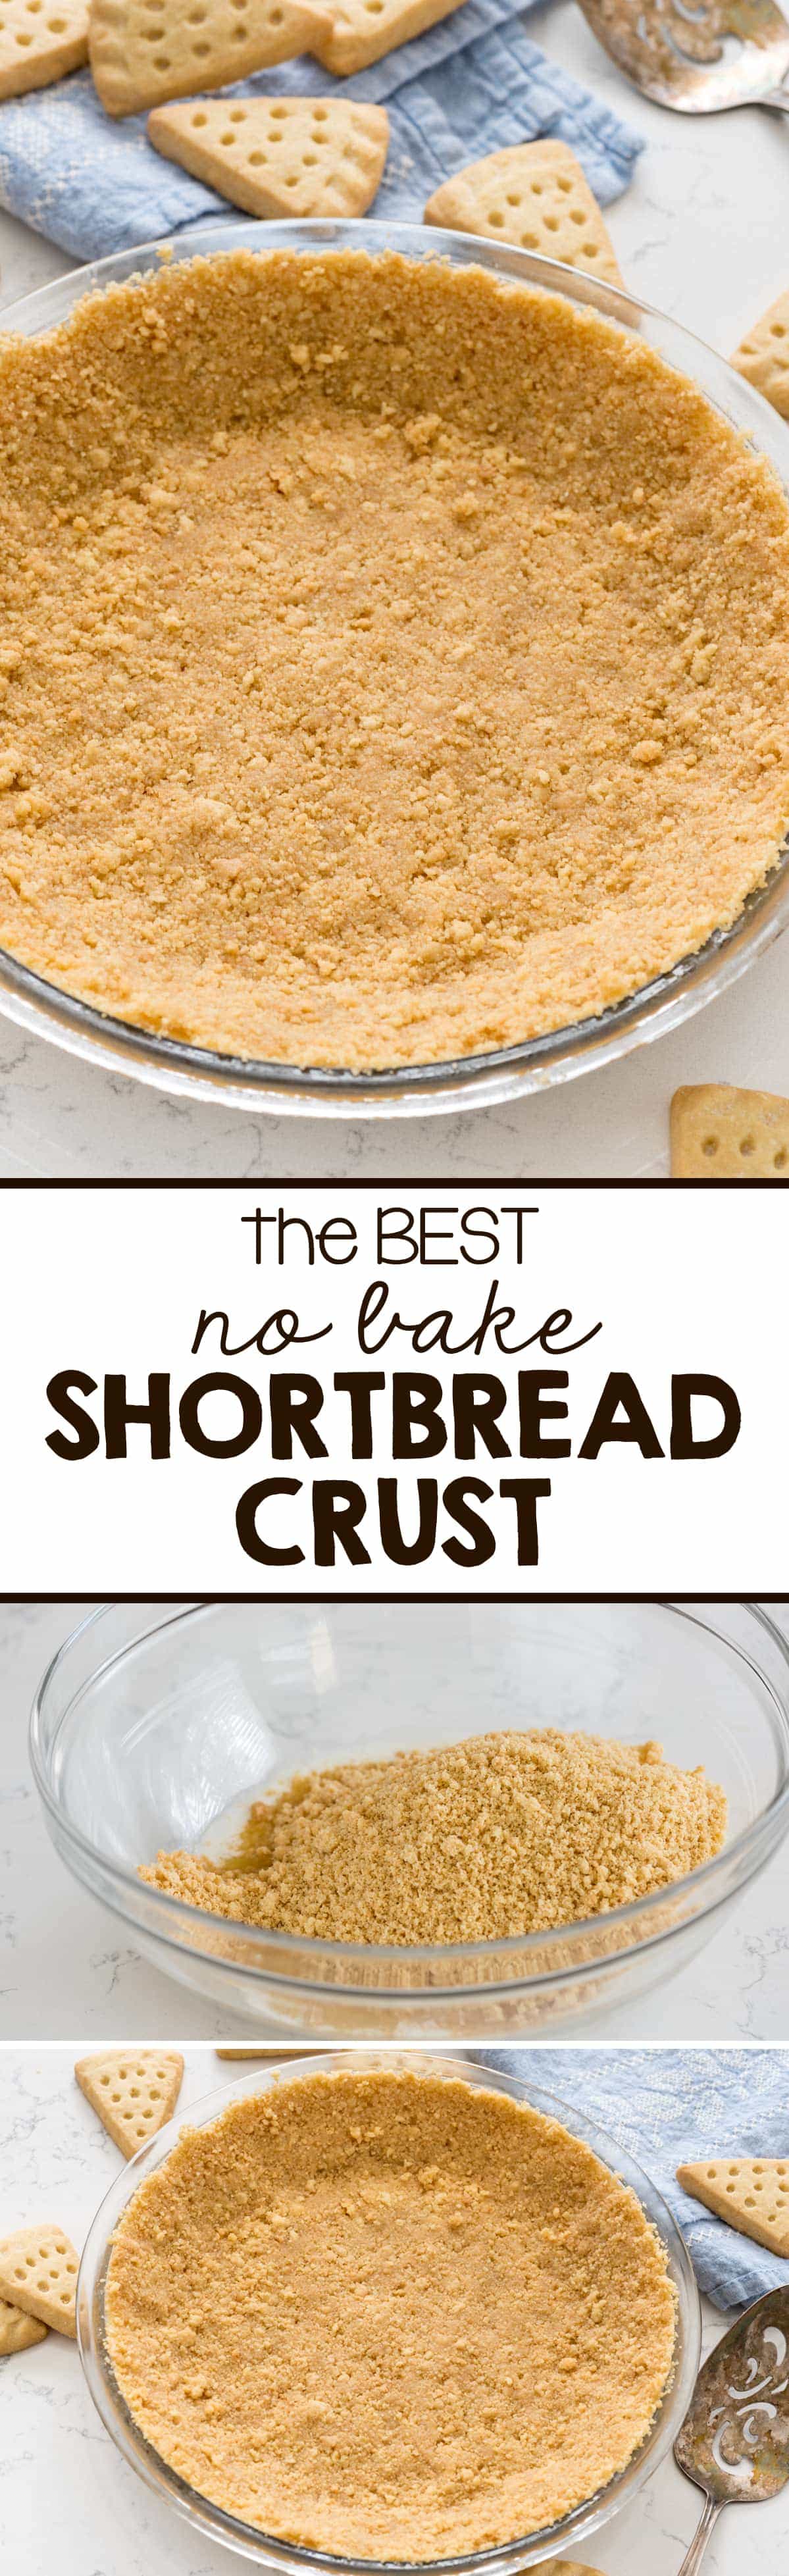 The BEST Shortbread Crust Recipe - this easy shortbread crust is made from shortbread cookies and is perfect for any no-bake pie recipe!